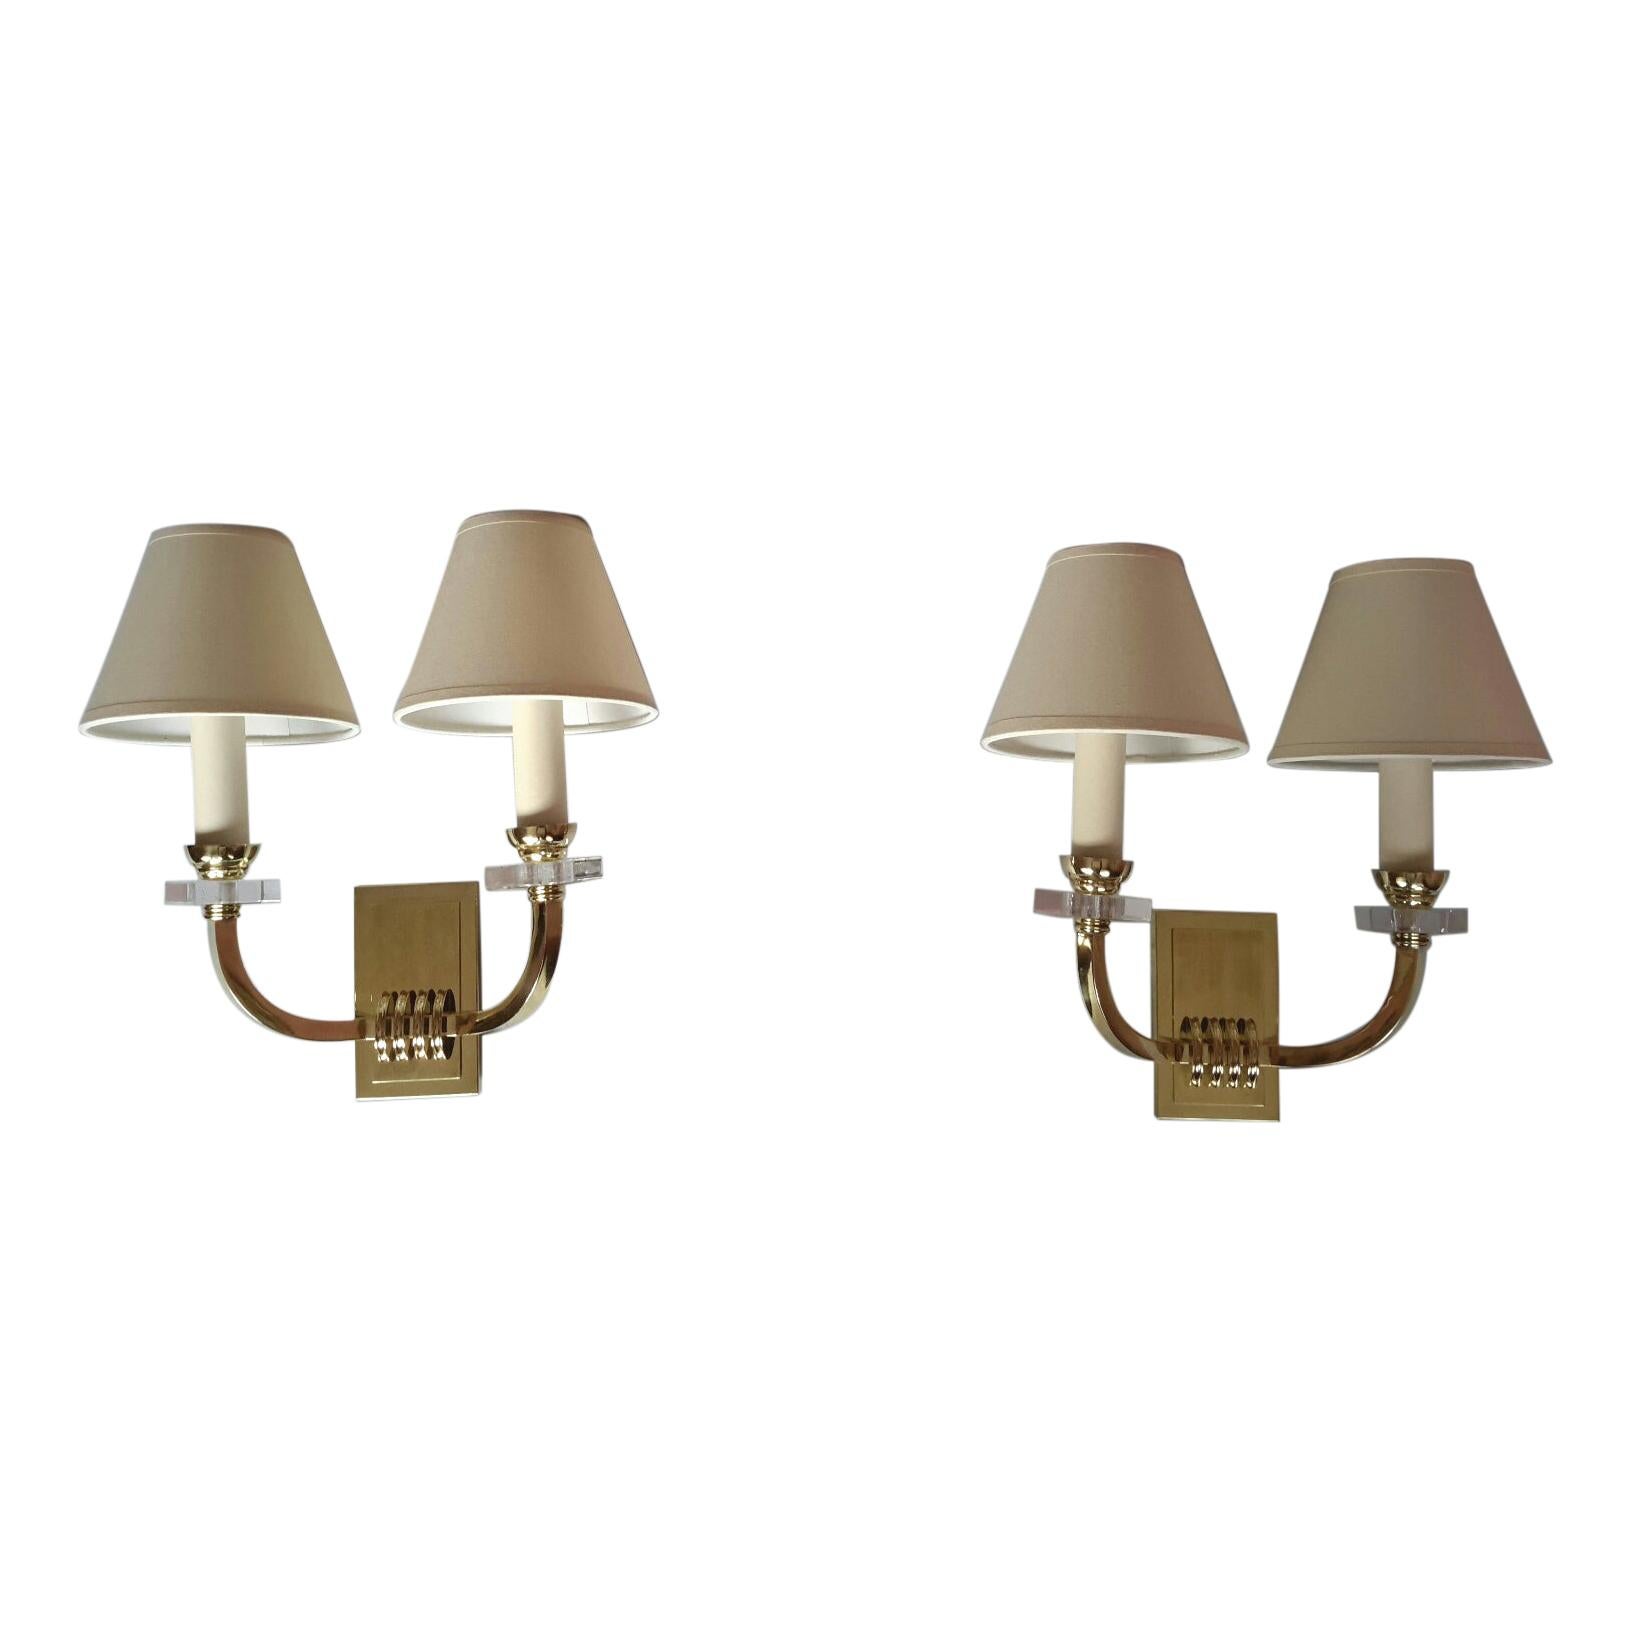 Jacques Adnet Neoclassical Wall Sconces, France, 1950 For Sale